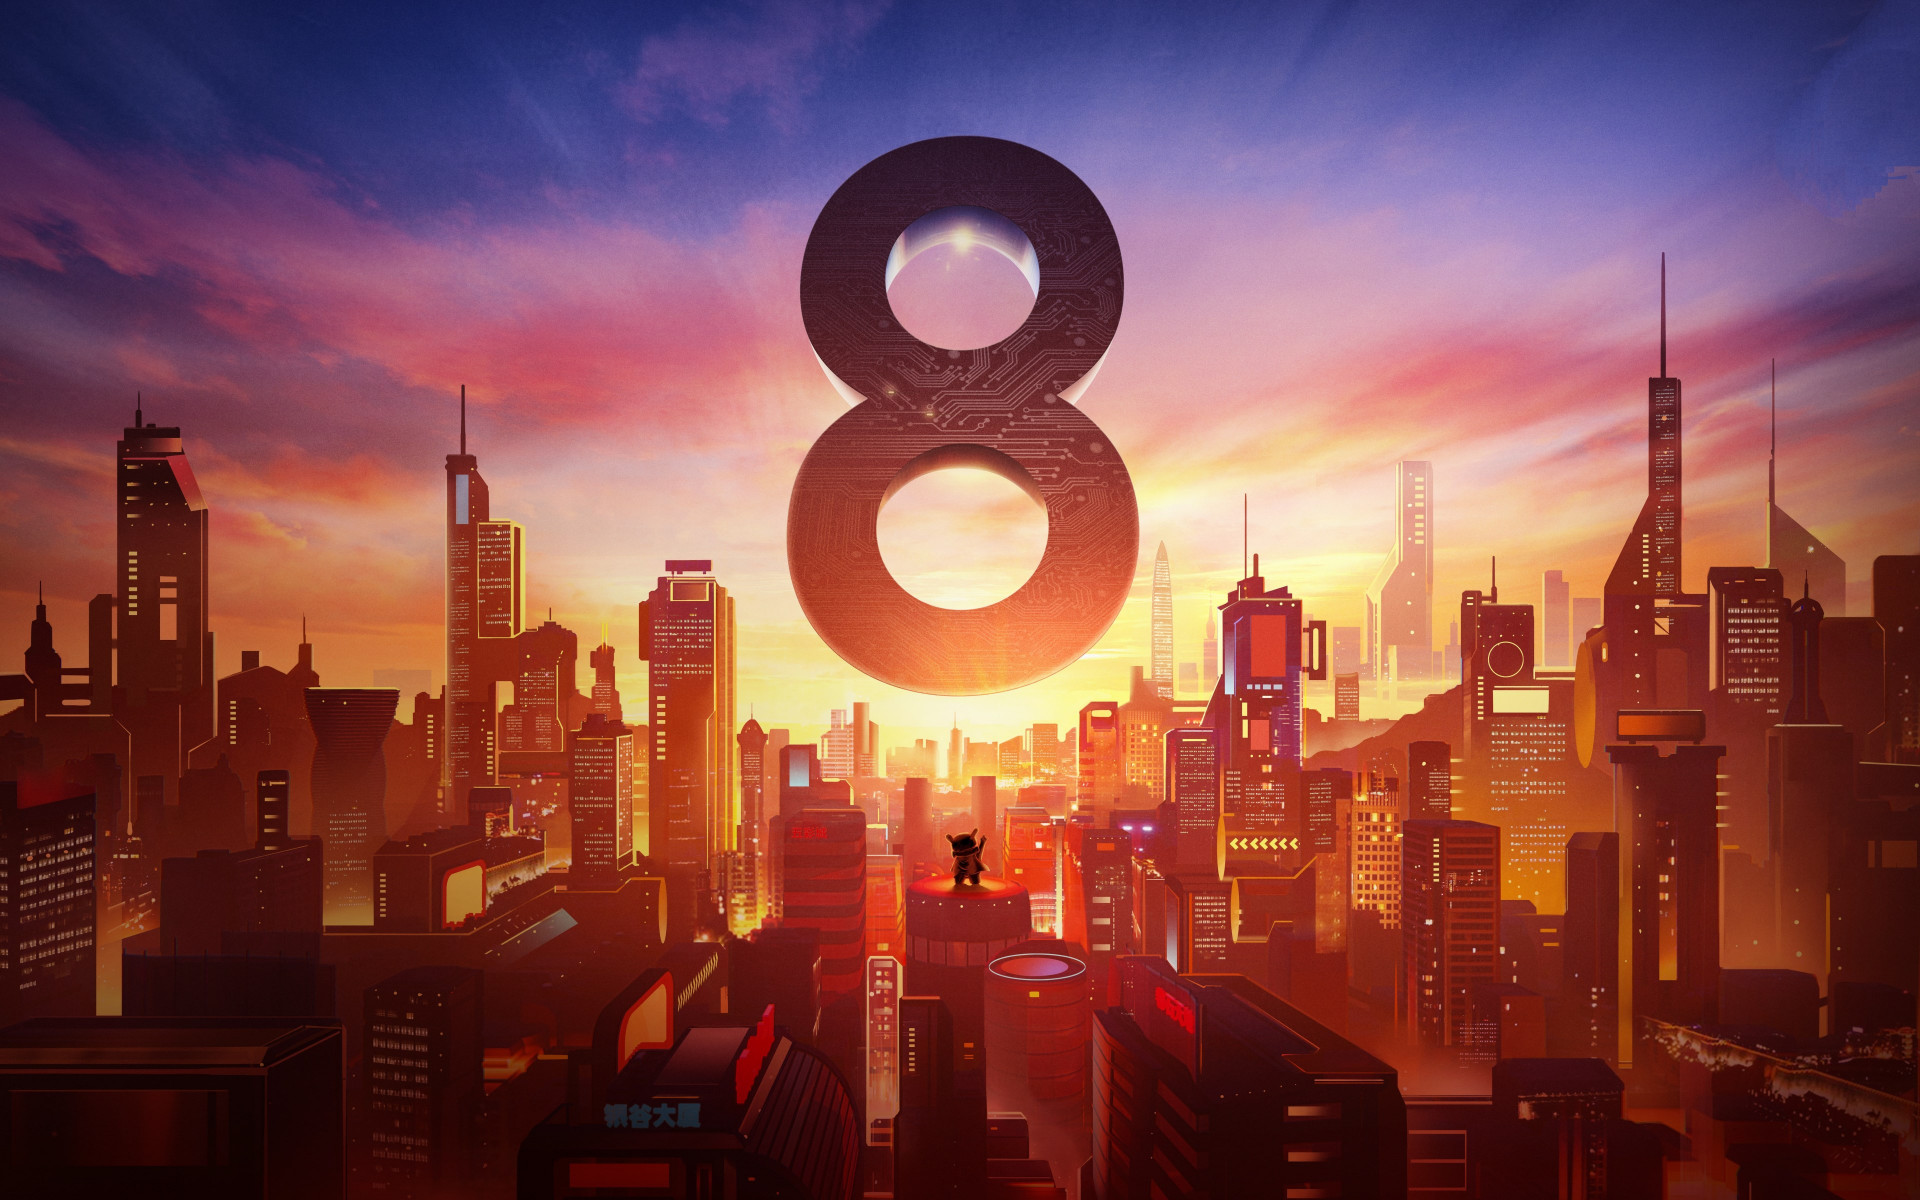 Xiaomi Mi 8. Poster from the launch event wallpaper 1920x1200